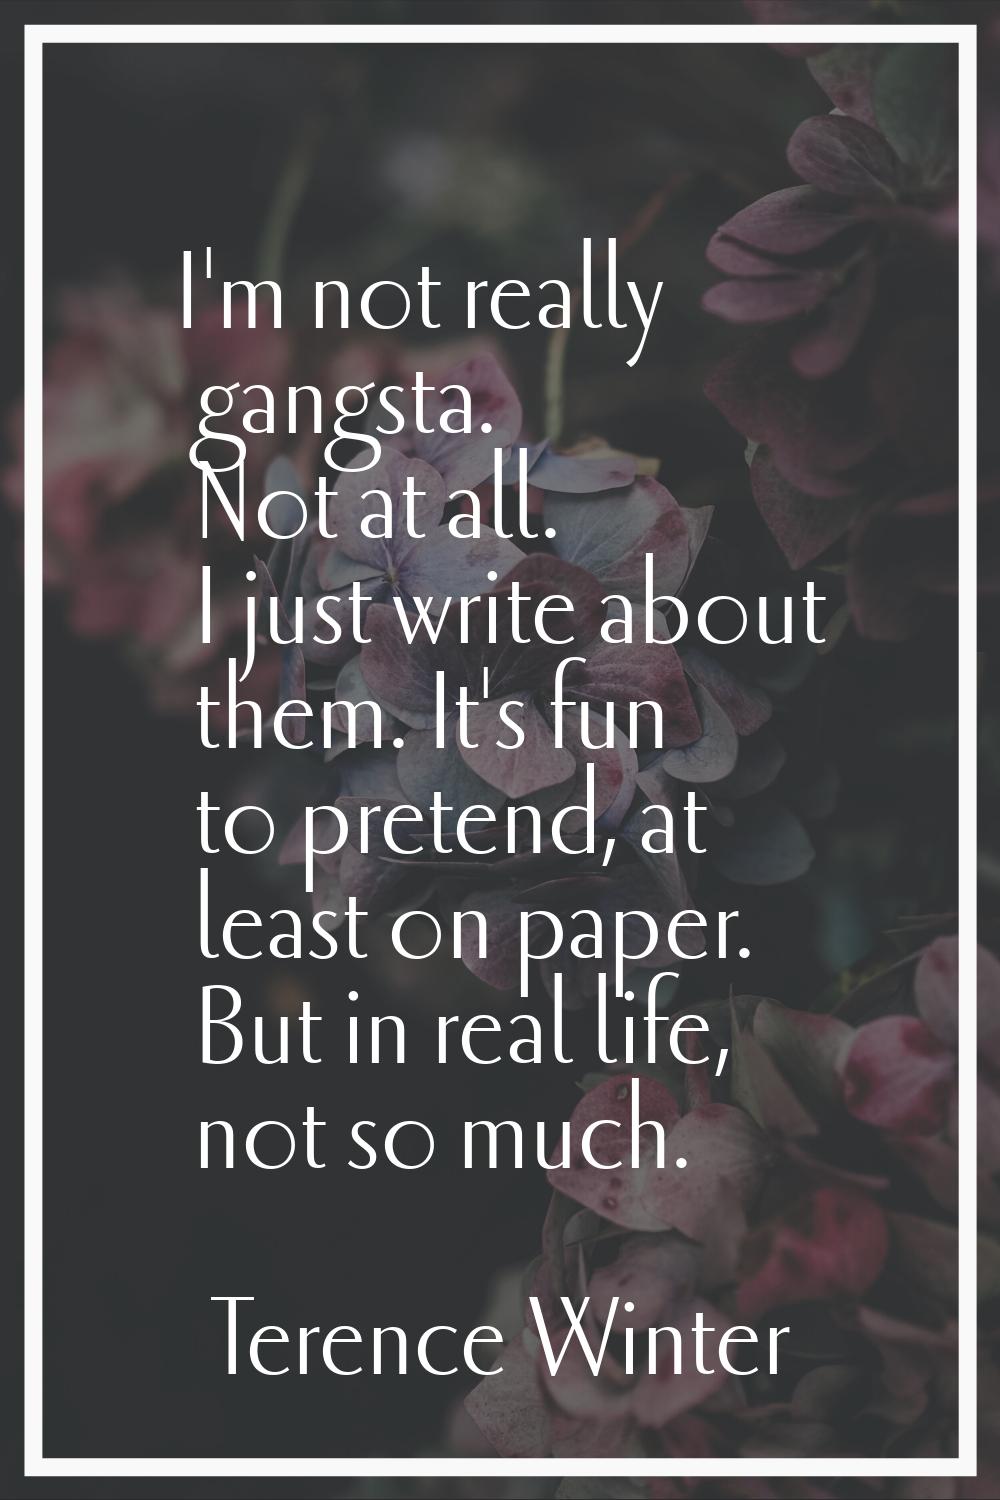 I'm not really gangsta. Not at all. I just write about them. It's fun to pretend, at least on paper